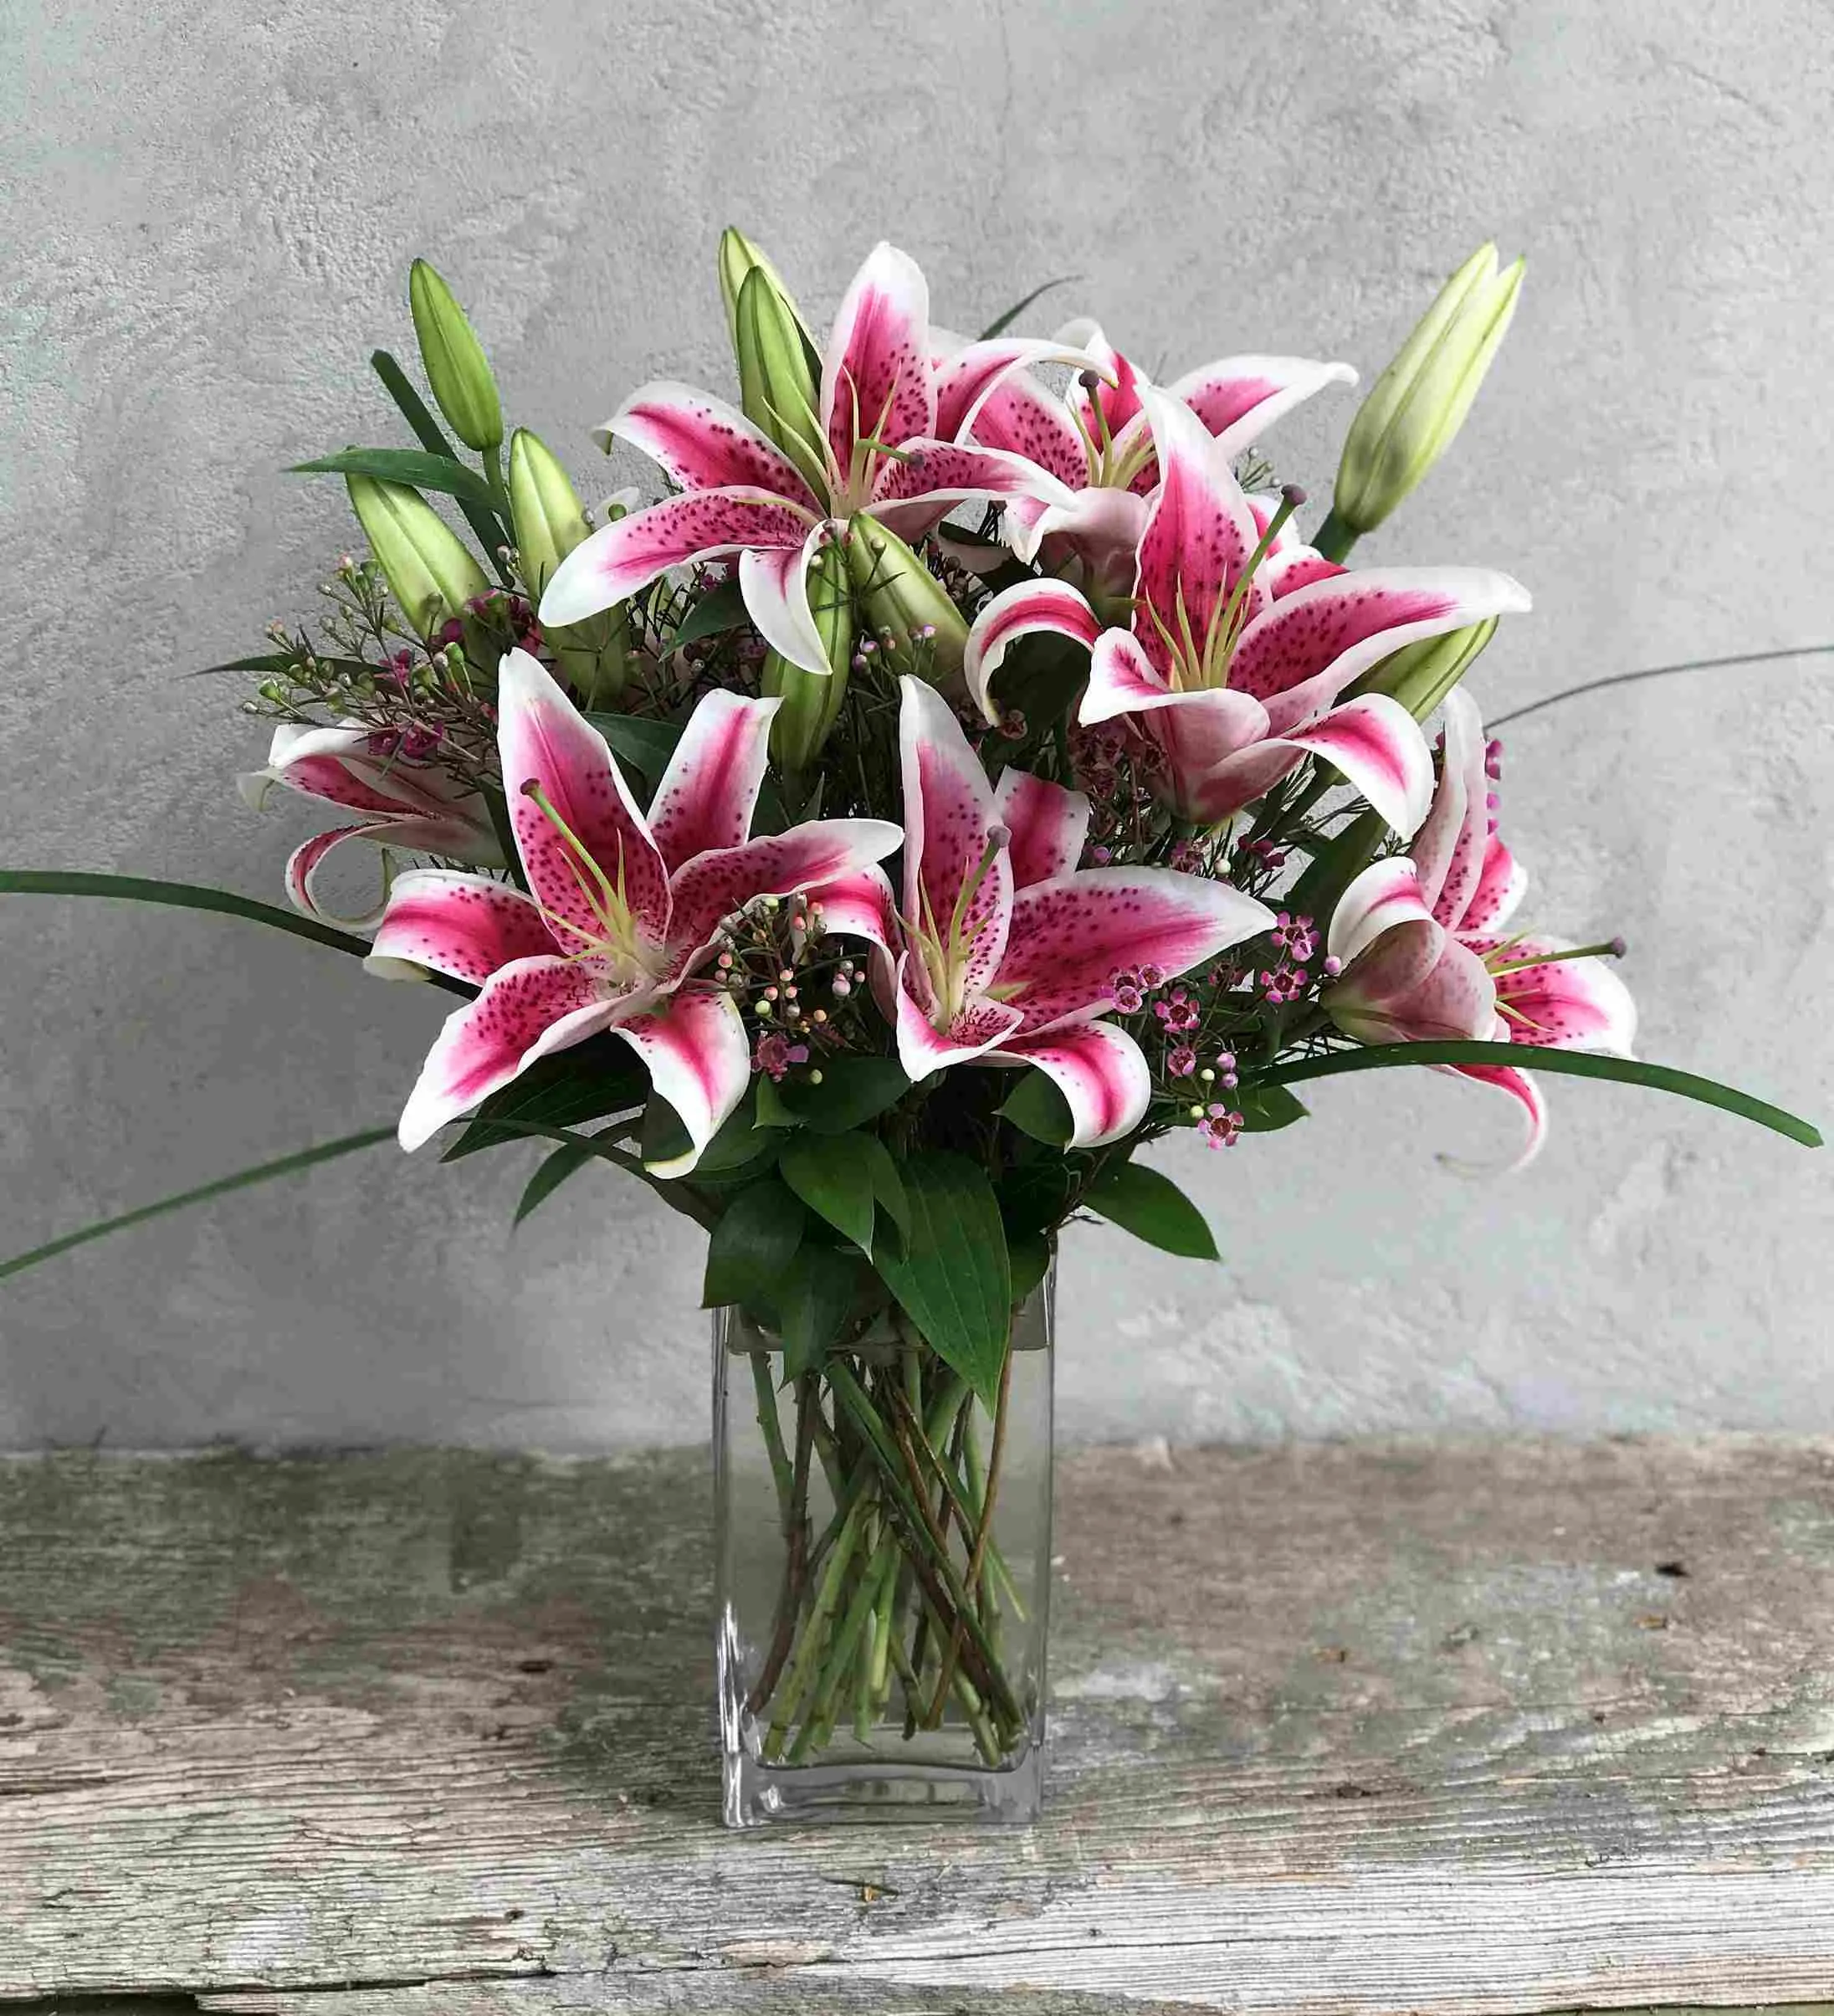 White and pink lily flowers in a glass vase with green foilage